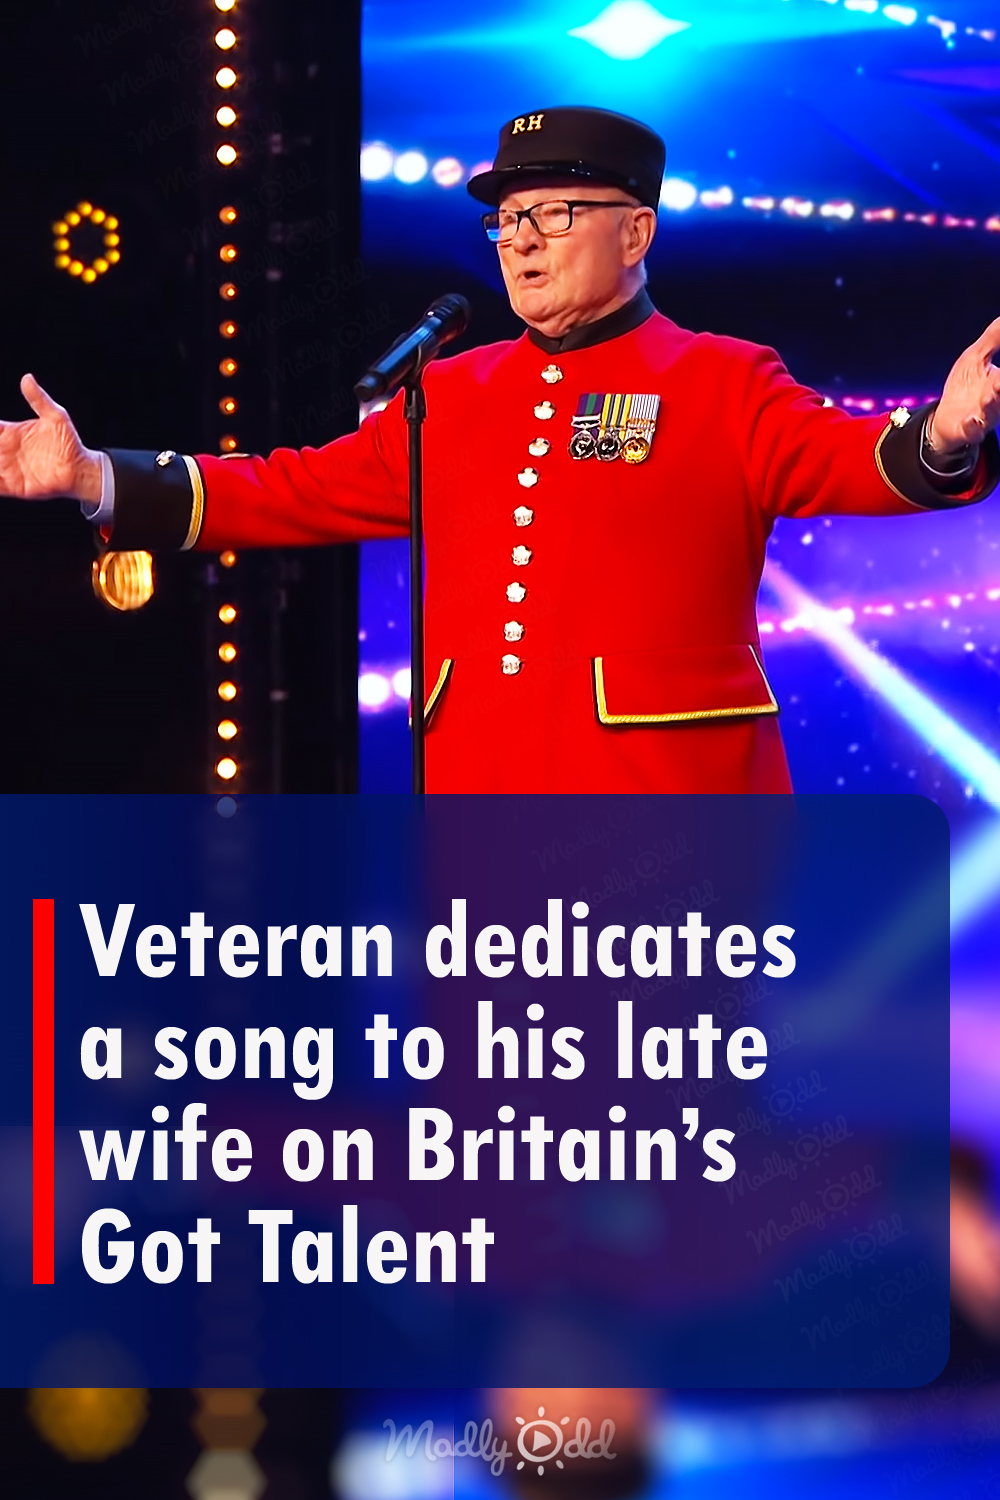 Veteran dedicates a song to his late wife on Britain’s Got Talent